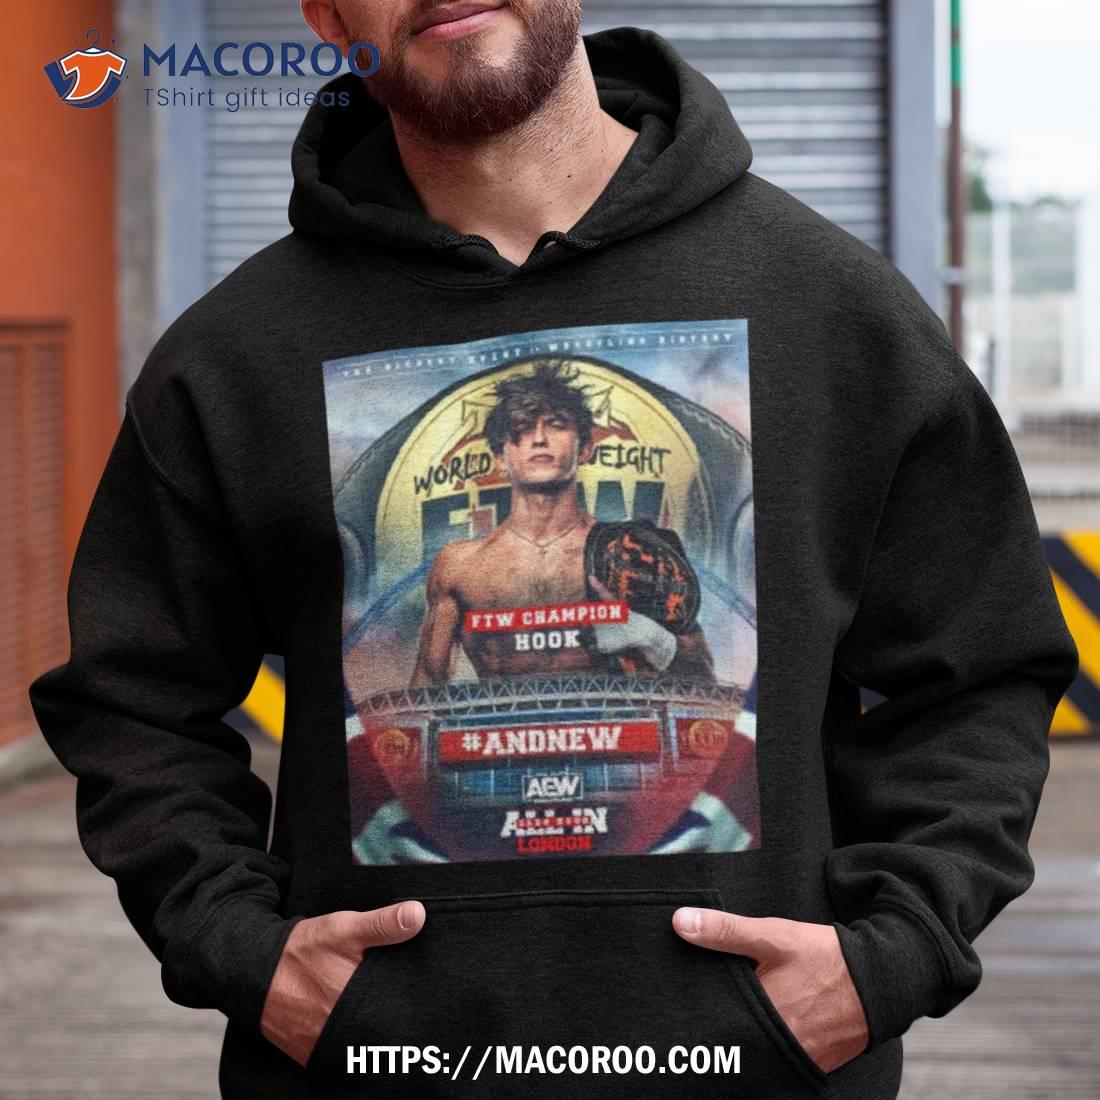 https://images.macoroo.com/wp-content/uploads/2023/09/congrats-hook-is-the-new-ftw-champion-in-aew-all-in-london-zero-hour-unisex-shirt-hoodie.jpg